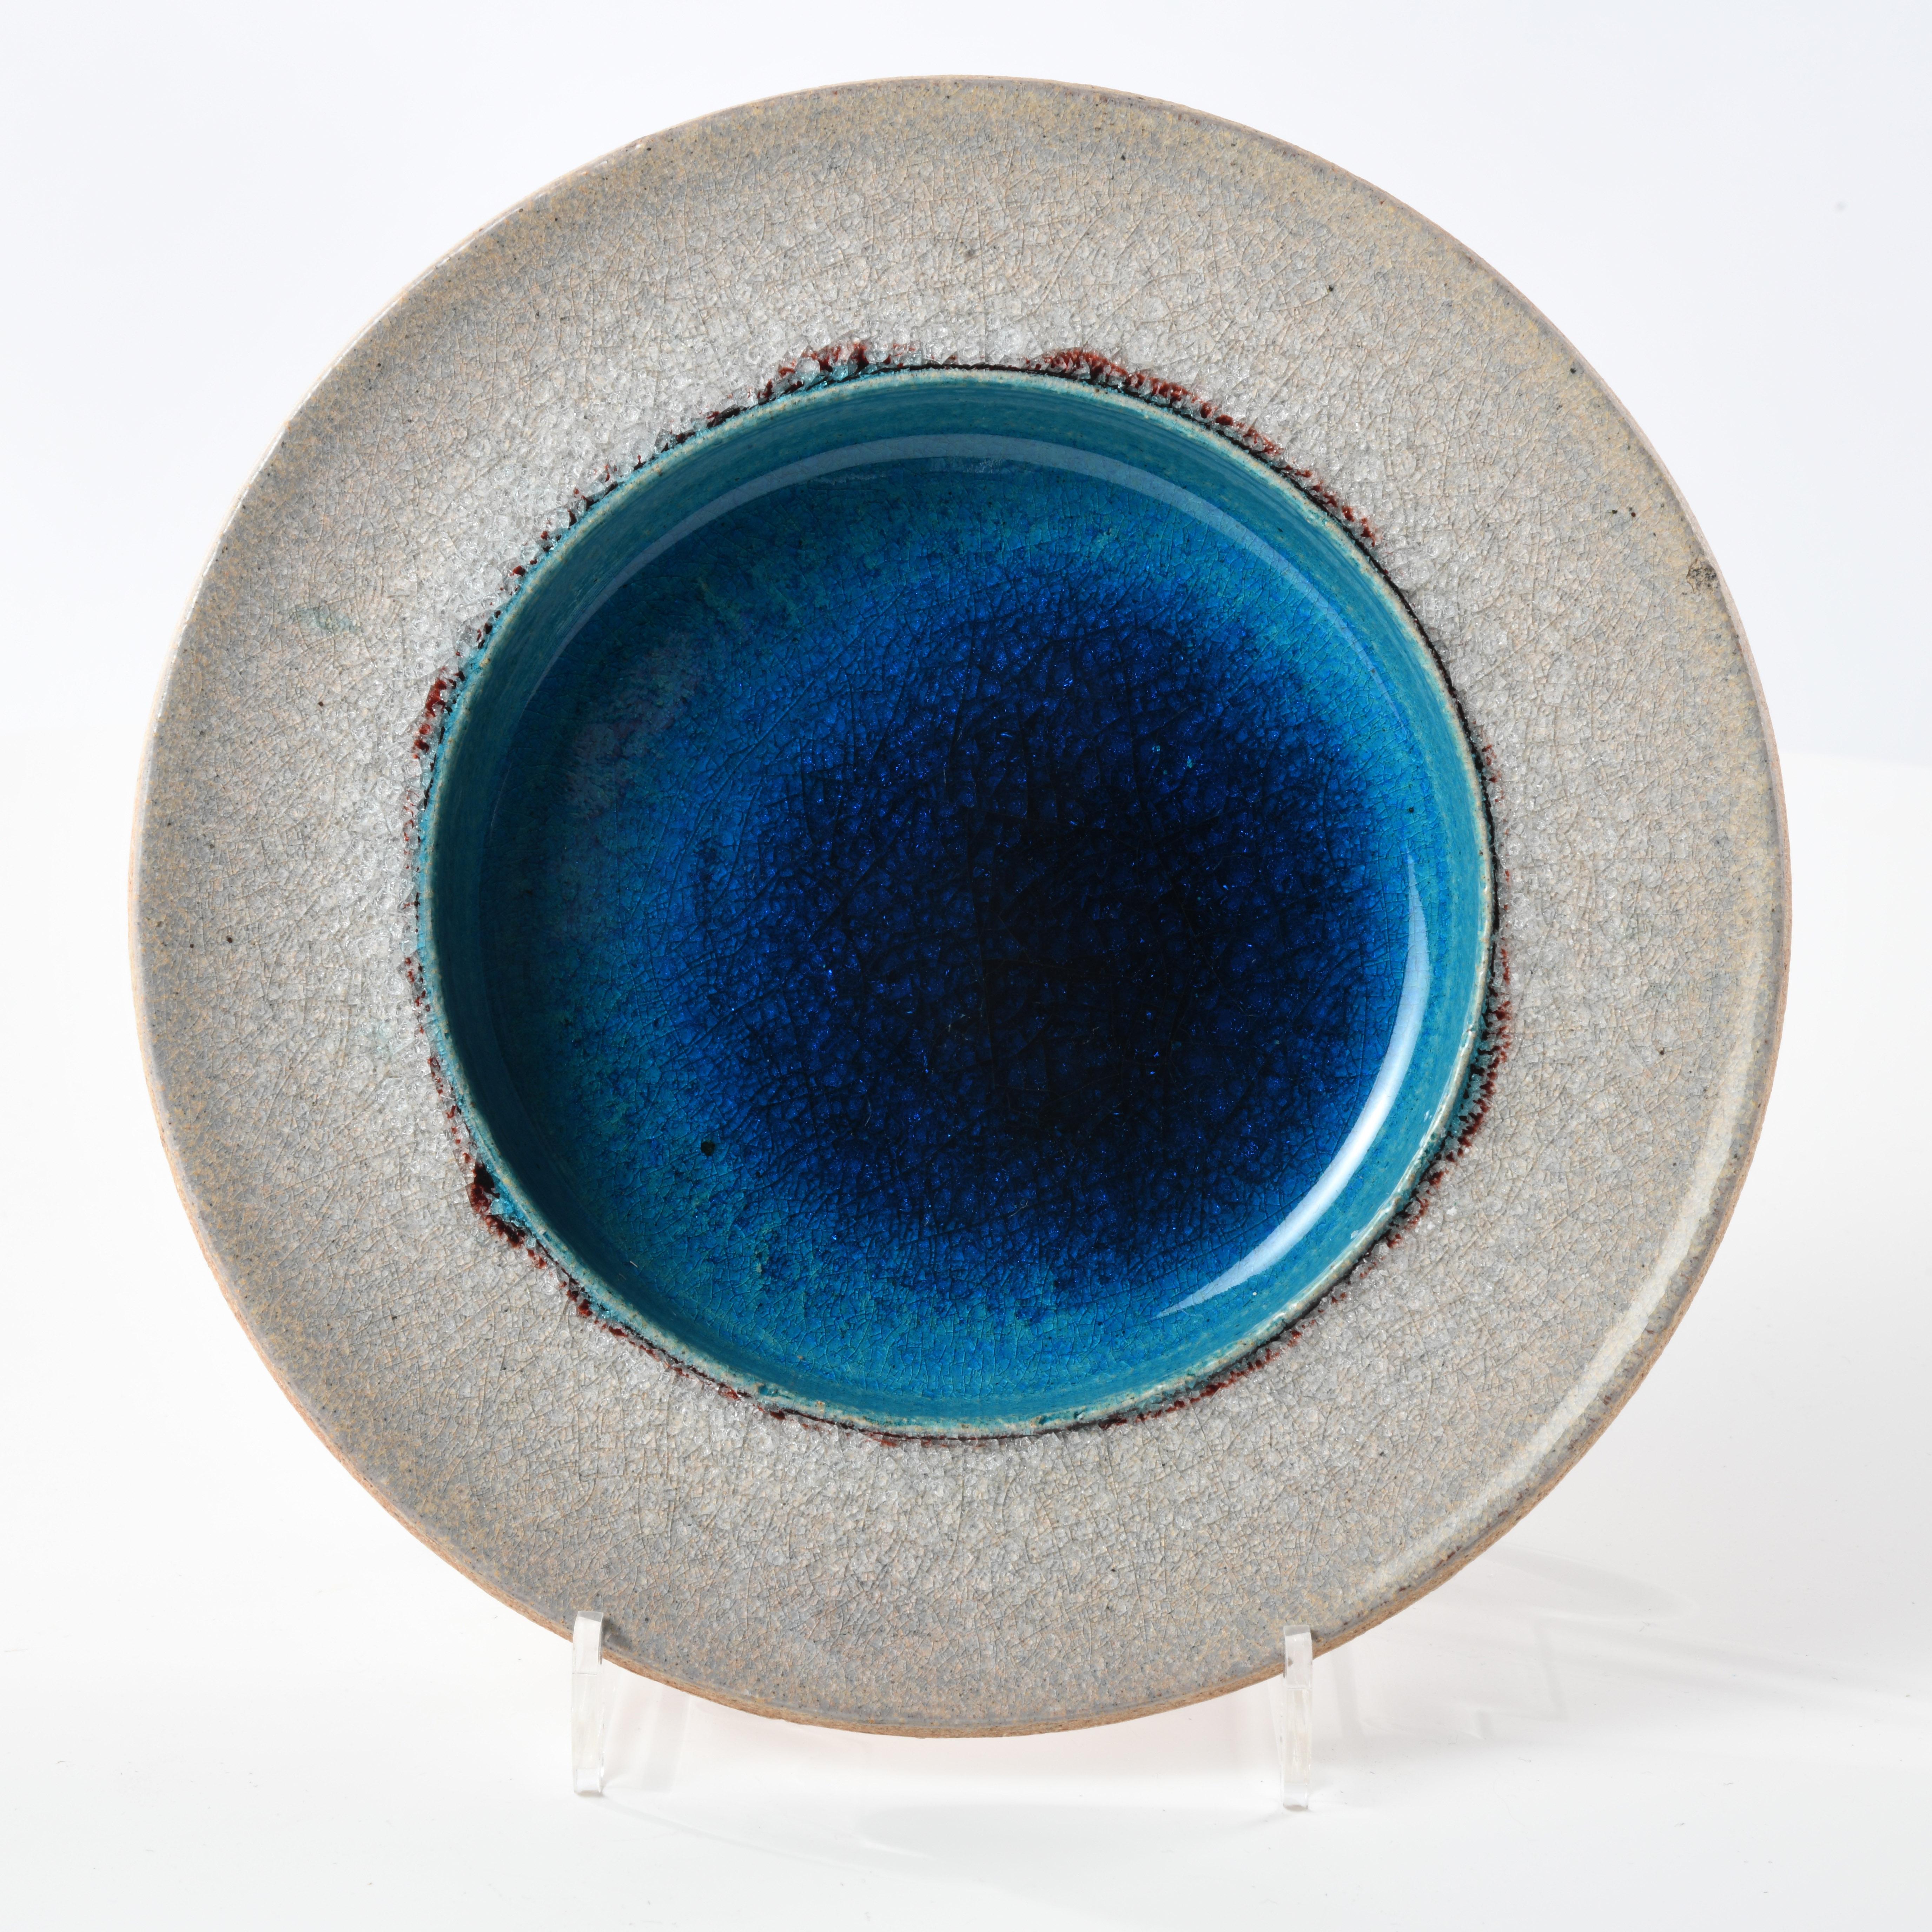 Small stoneware dish glazed in the 1960s in Denmark, signed Nils Kähler (1906-1979). Beautiful two-tone glaze, light grey with deep turquoise tones. Signature and label underneath. 
The Kähler factory was founded in Denmark in 1839 by Joachim